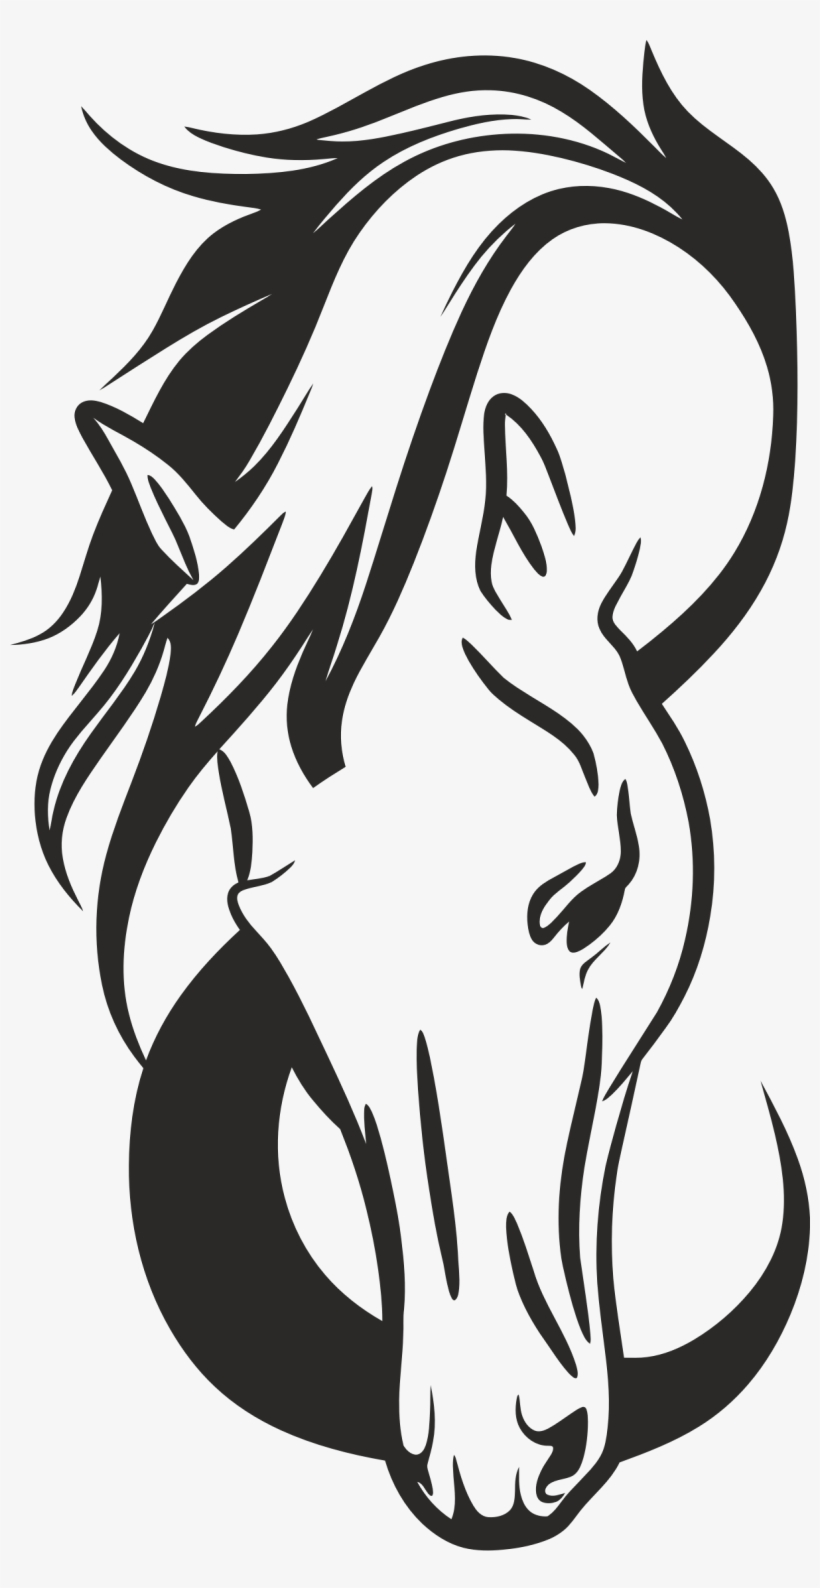 This Free Icons Png Design Of Horse Head Silhouette, transparent png #644813